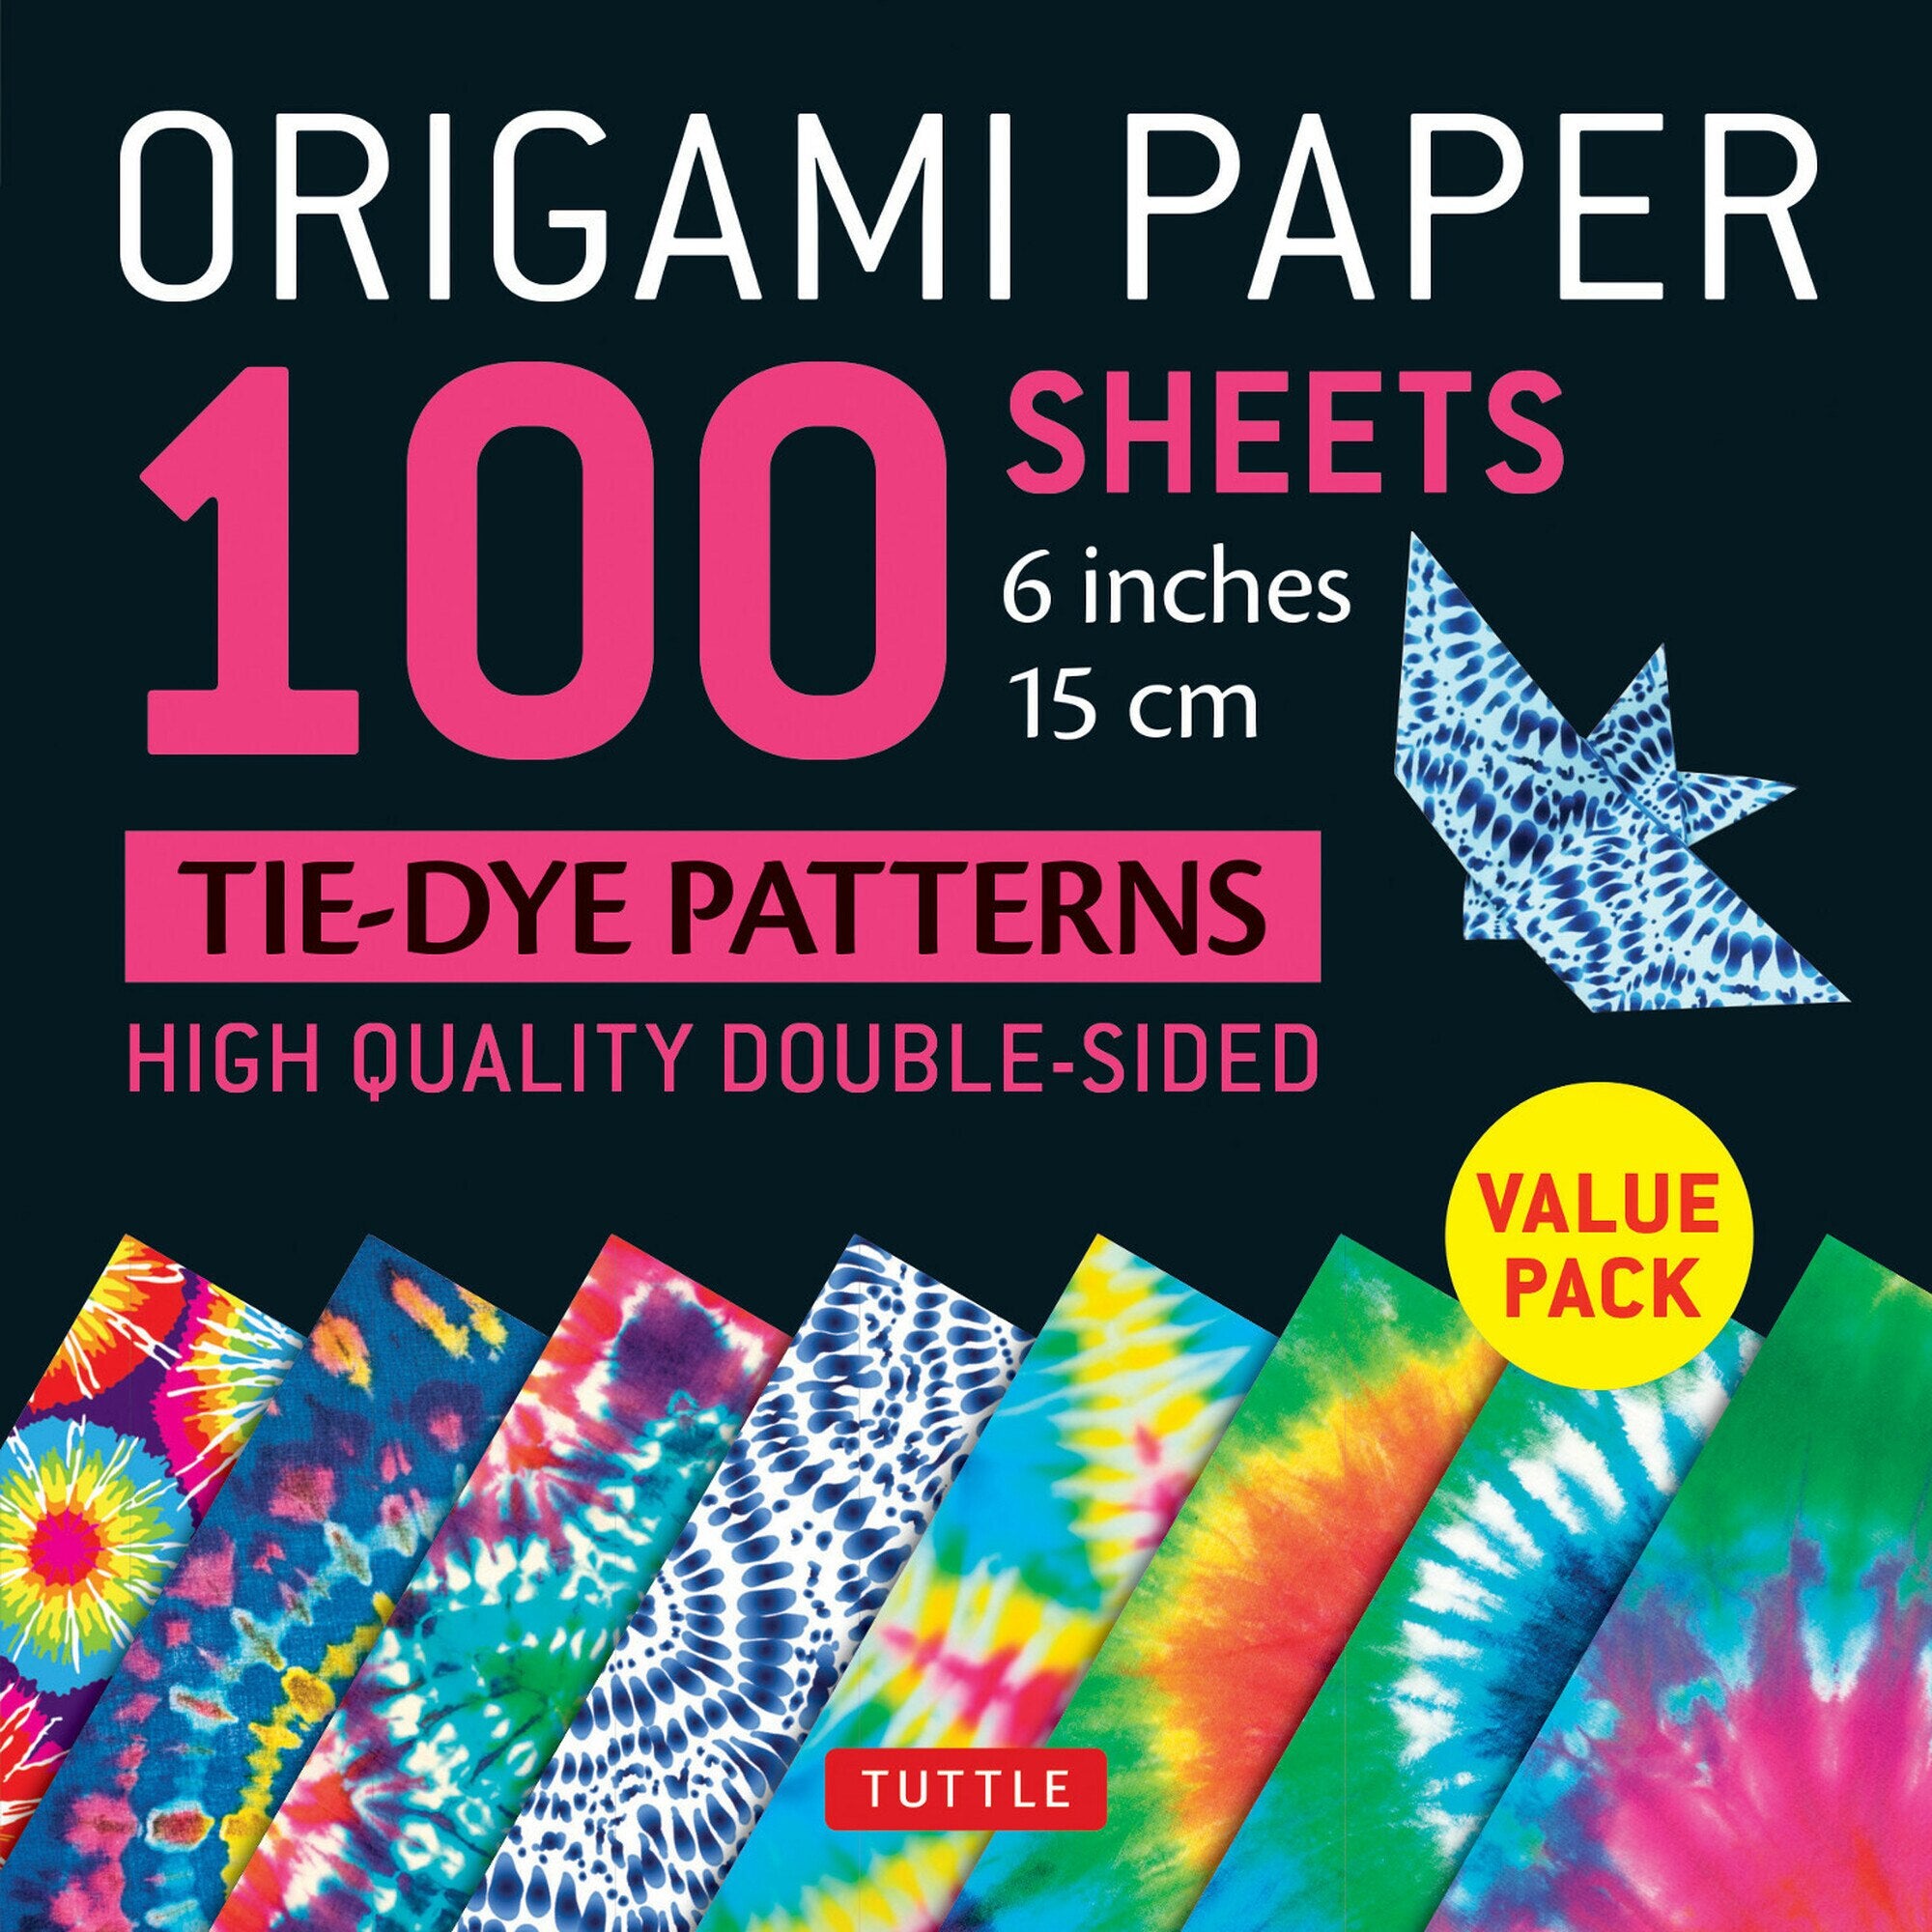 100 Sheets Tie-Dye Origami Paper